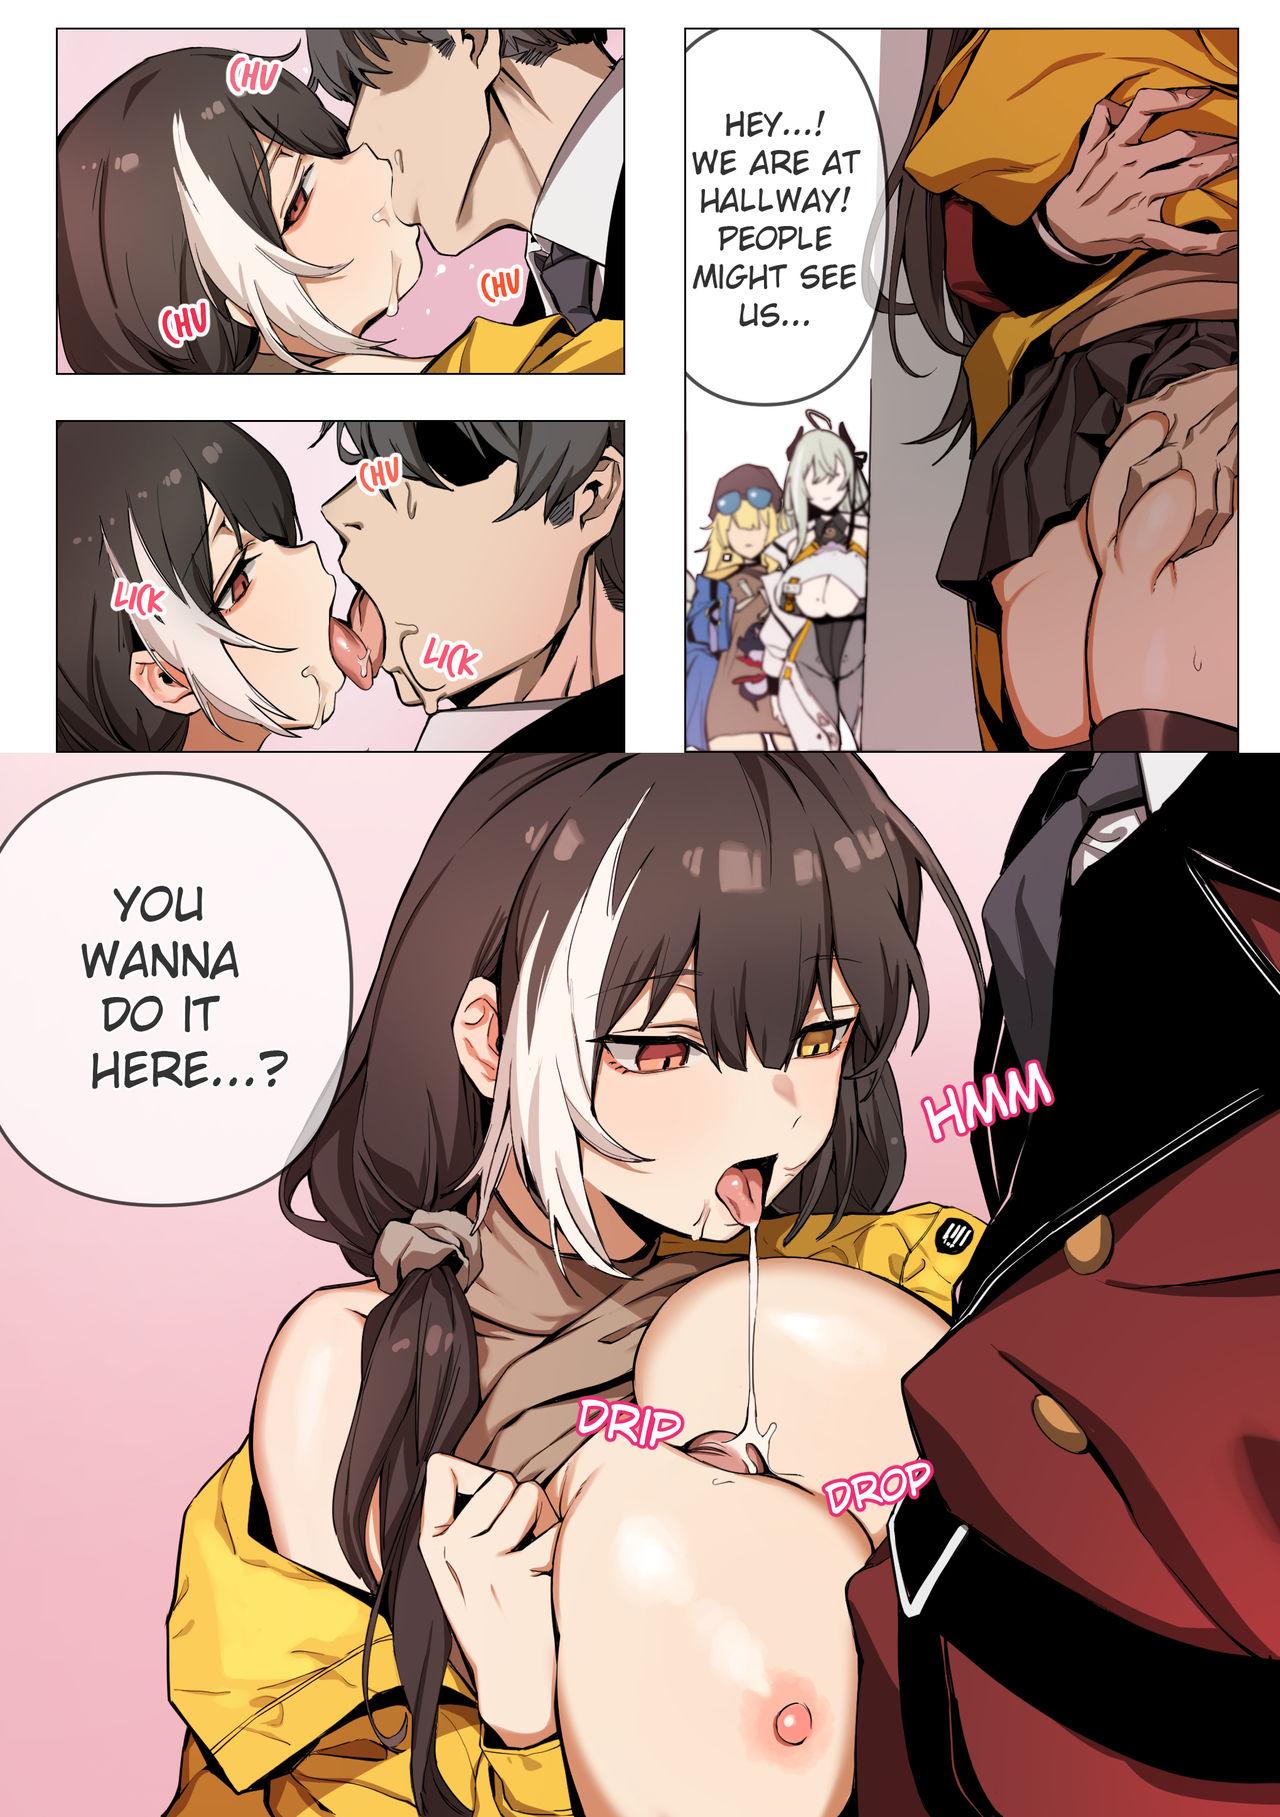 Stepsister ro635 - Girls frontline Pica - Page 3